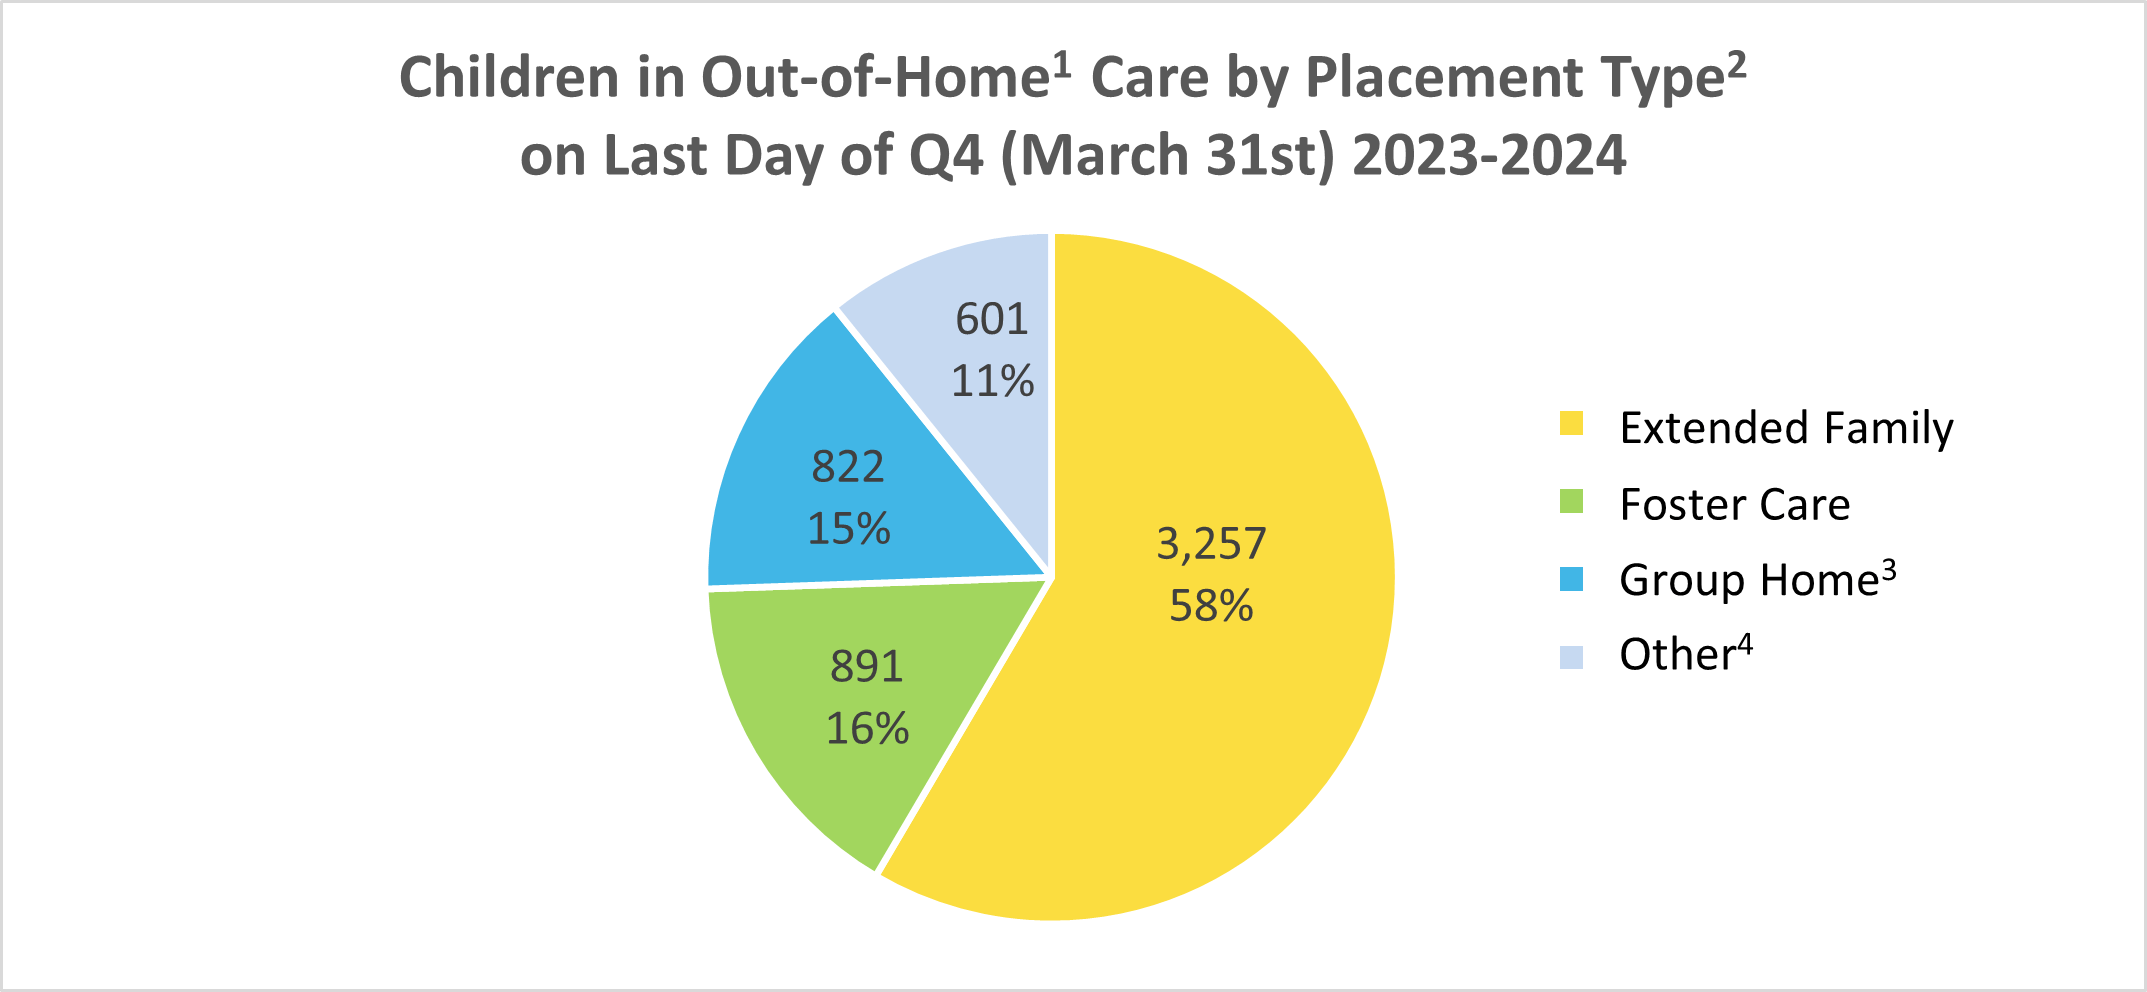 Placement Type for Children in Out-of-Home Care 2023